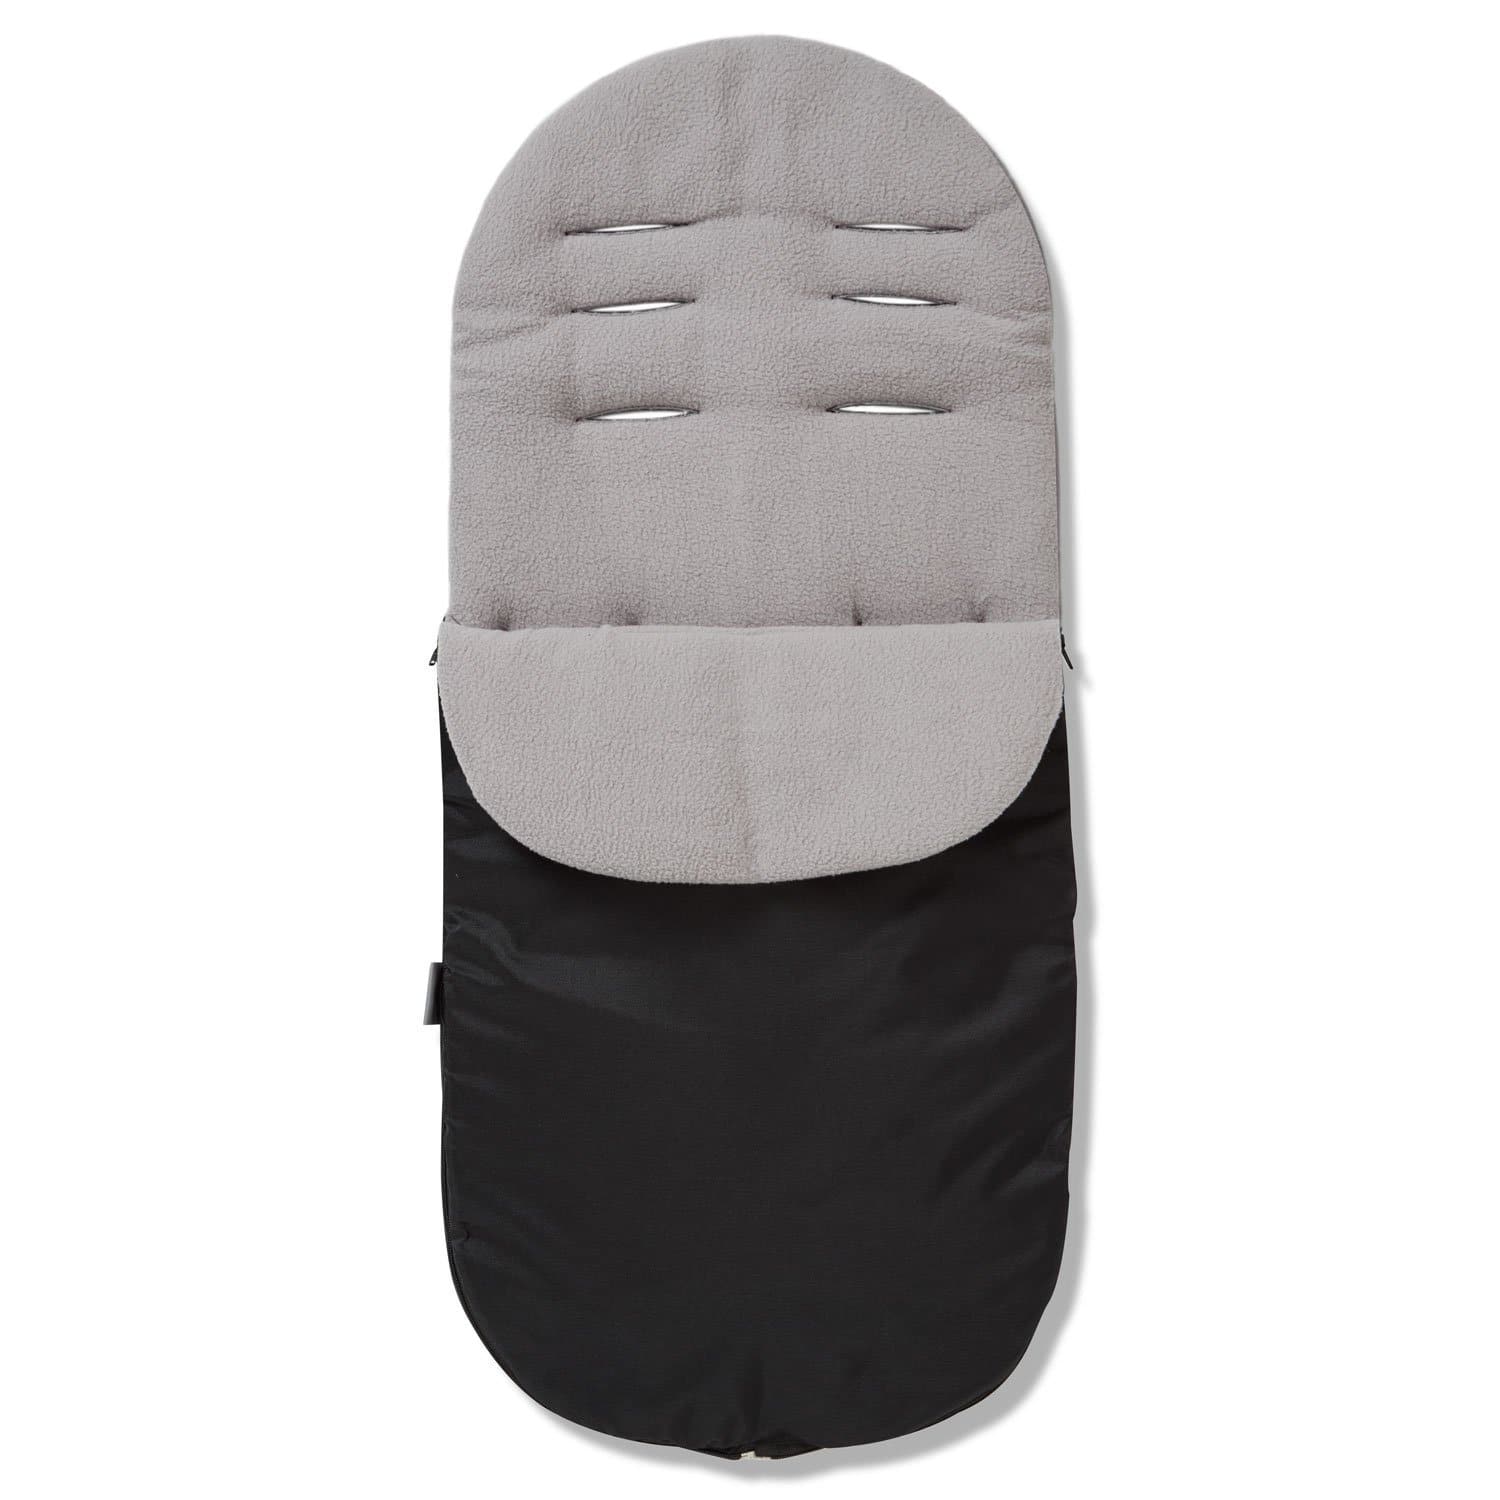 Footmuff / Cosy Toes Compatible with My Child - Grey / Fits All Models | For Your Little One